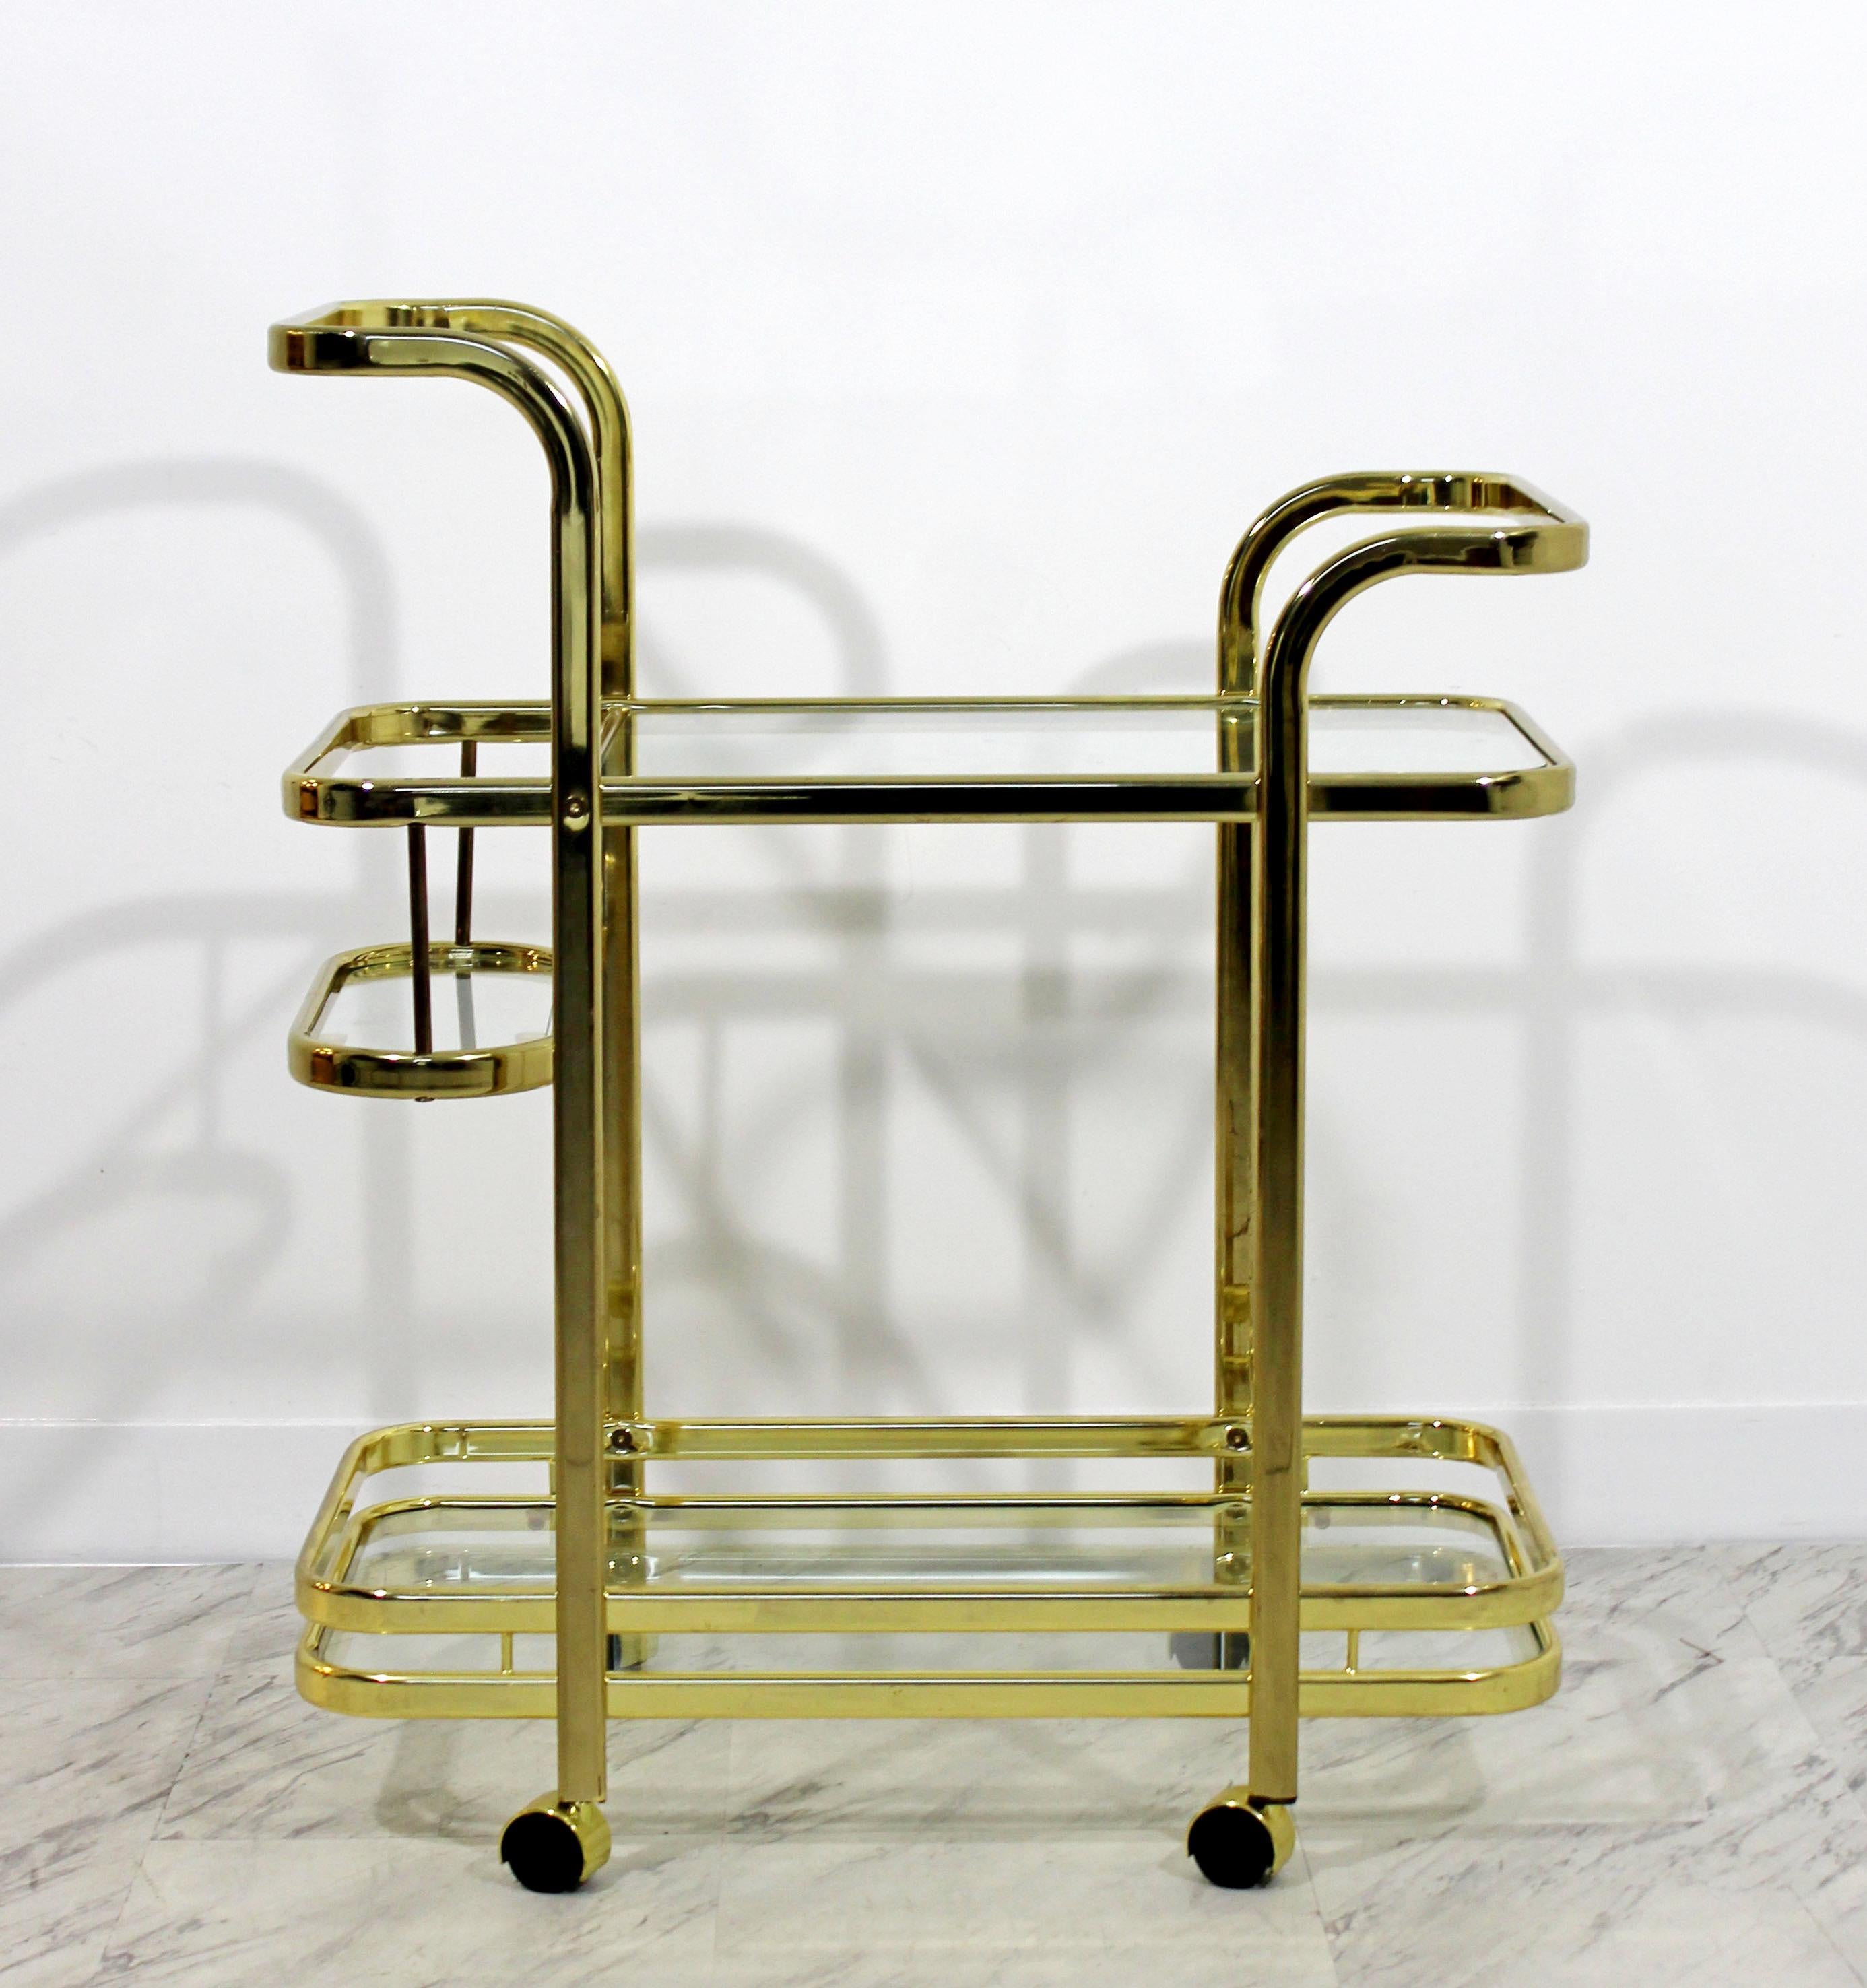 For your consideration is a diminutive, brass bar cart by Milo Baughman for DIA, with three-glass tiered shelves, in the Hollywood Regency style, circa the 1970s. In excellent condition. The dimensions are 26